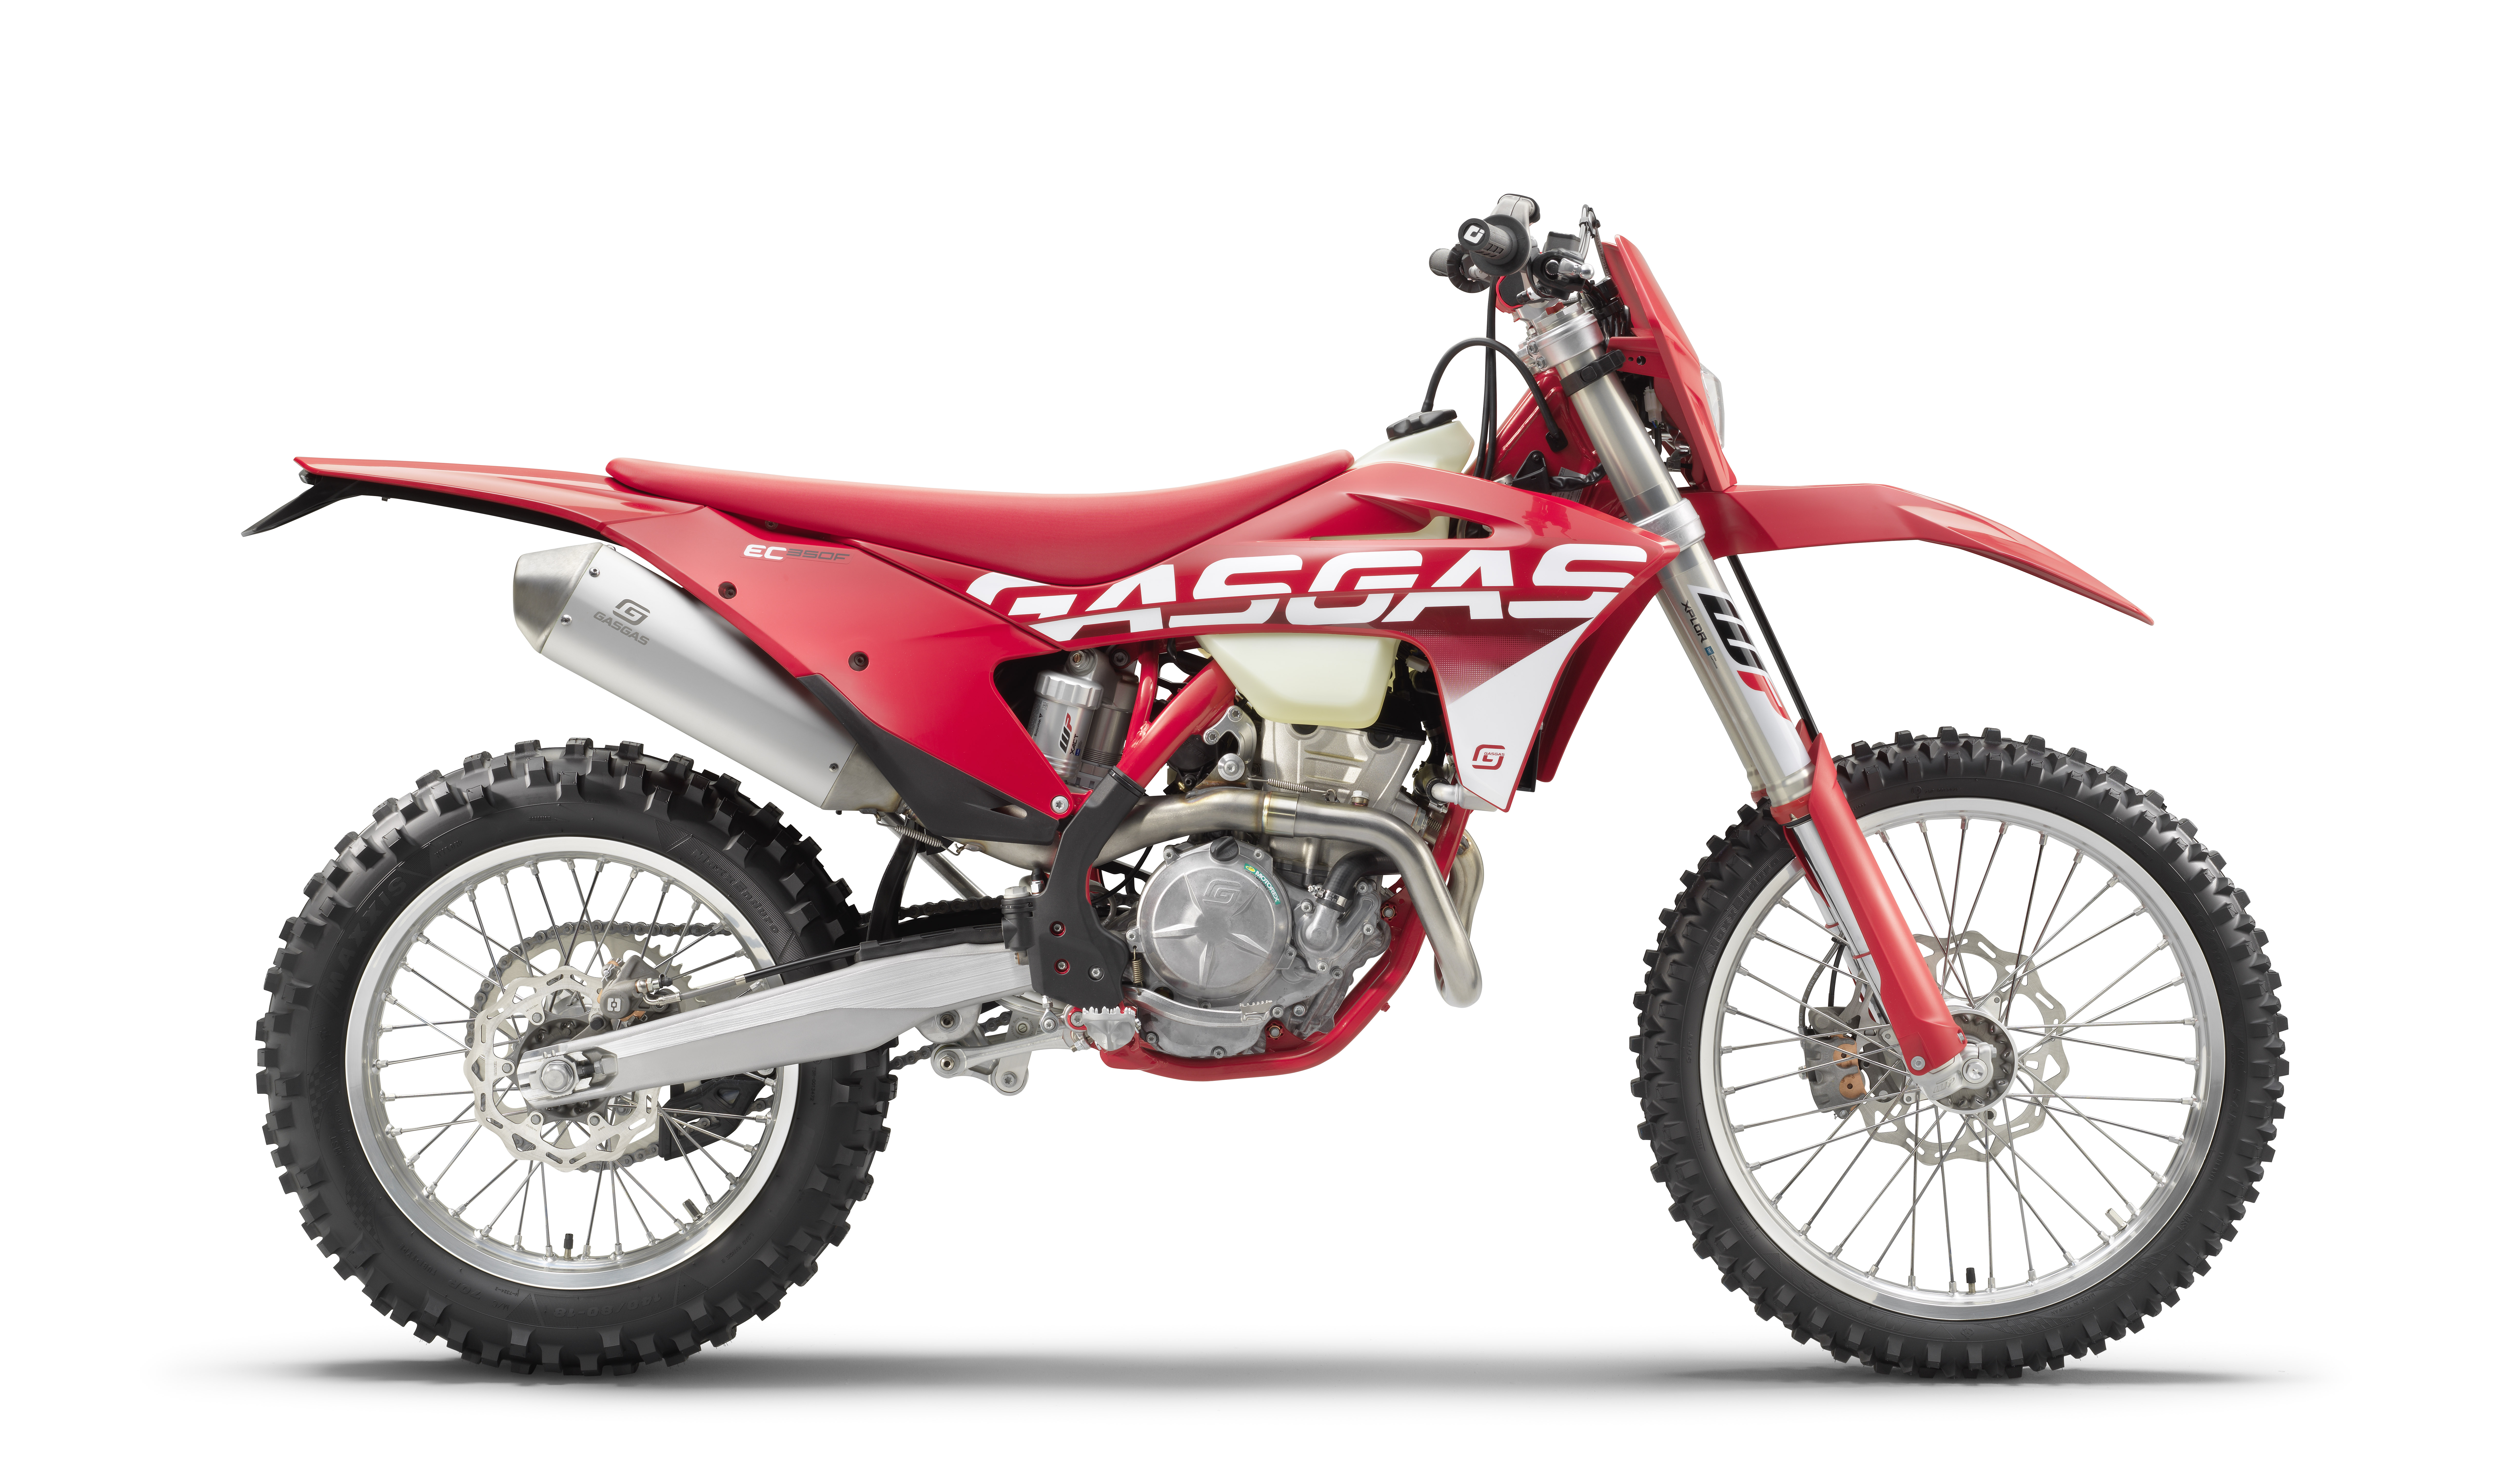 GasGas motorcycles now in Malaysia, enduro and motocross, range from RM39,500 to RM48,000 1493425